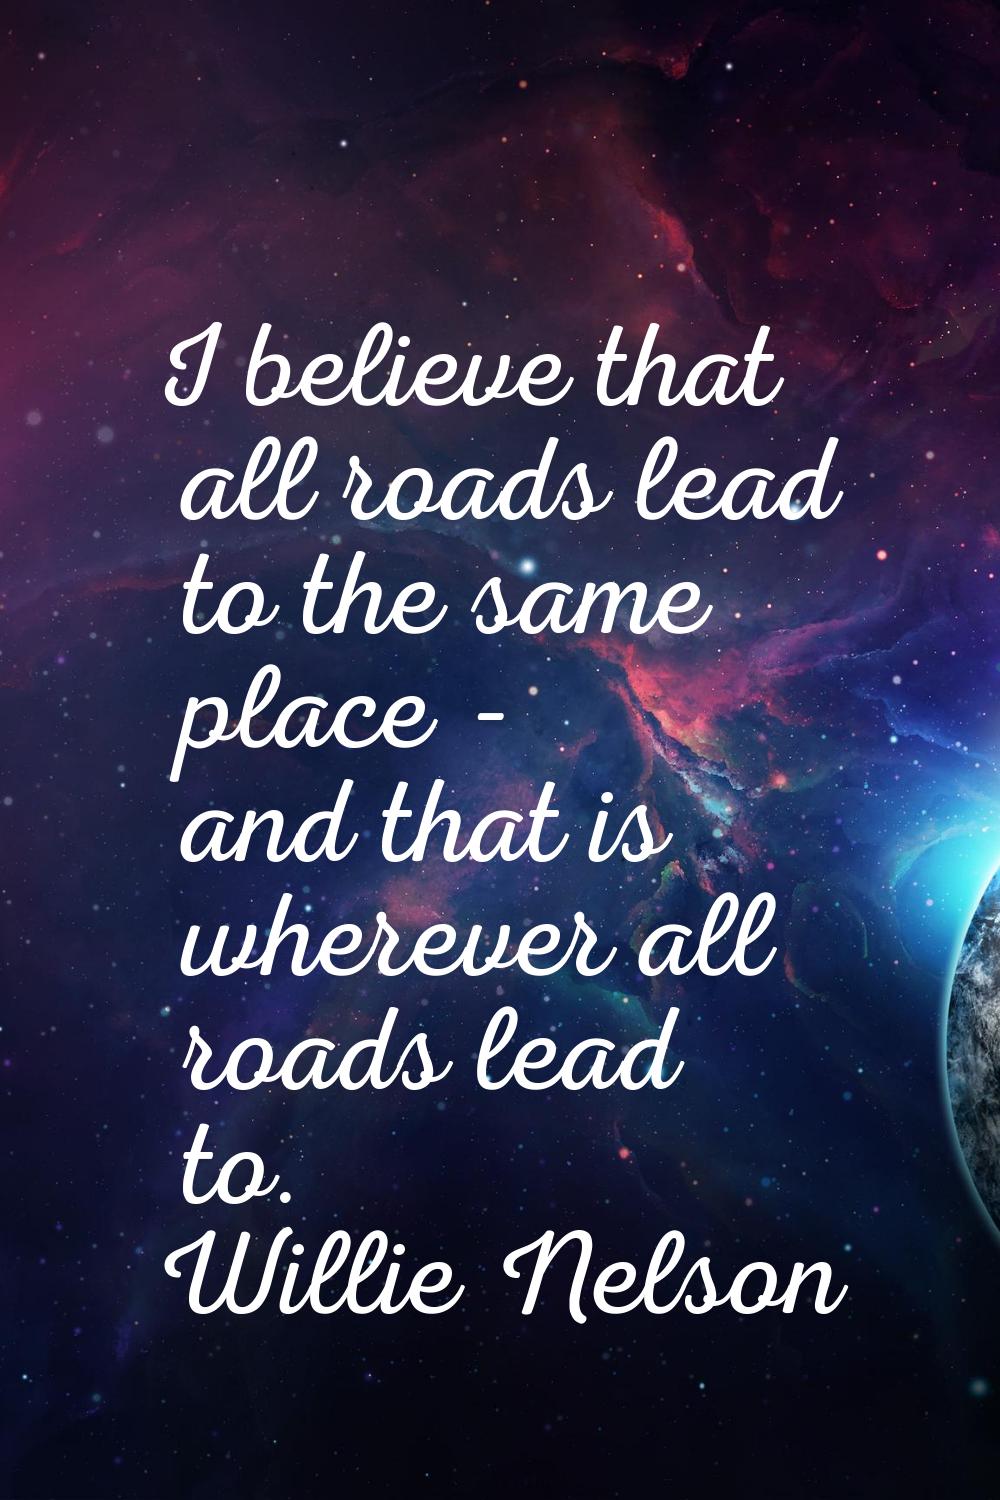 I believe that all roads lead to the same place - and that is wherever all roads lead to.